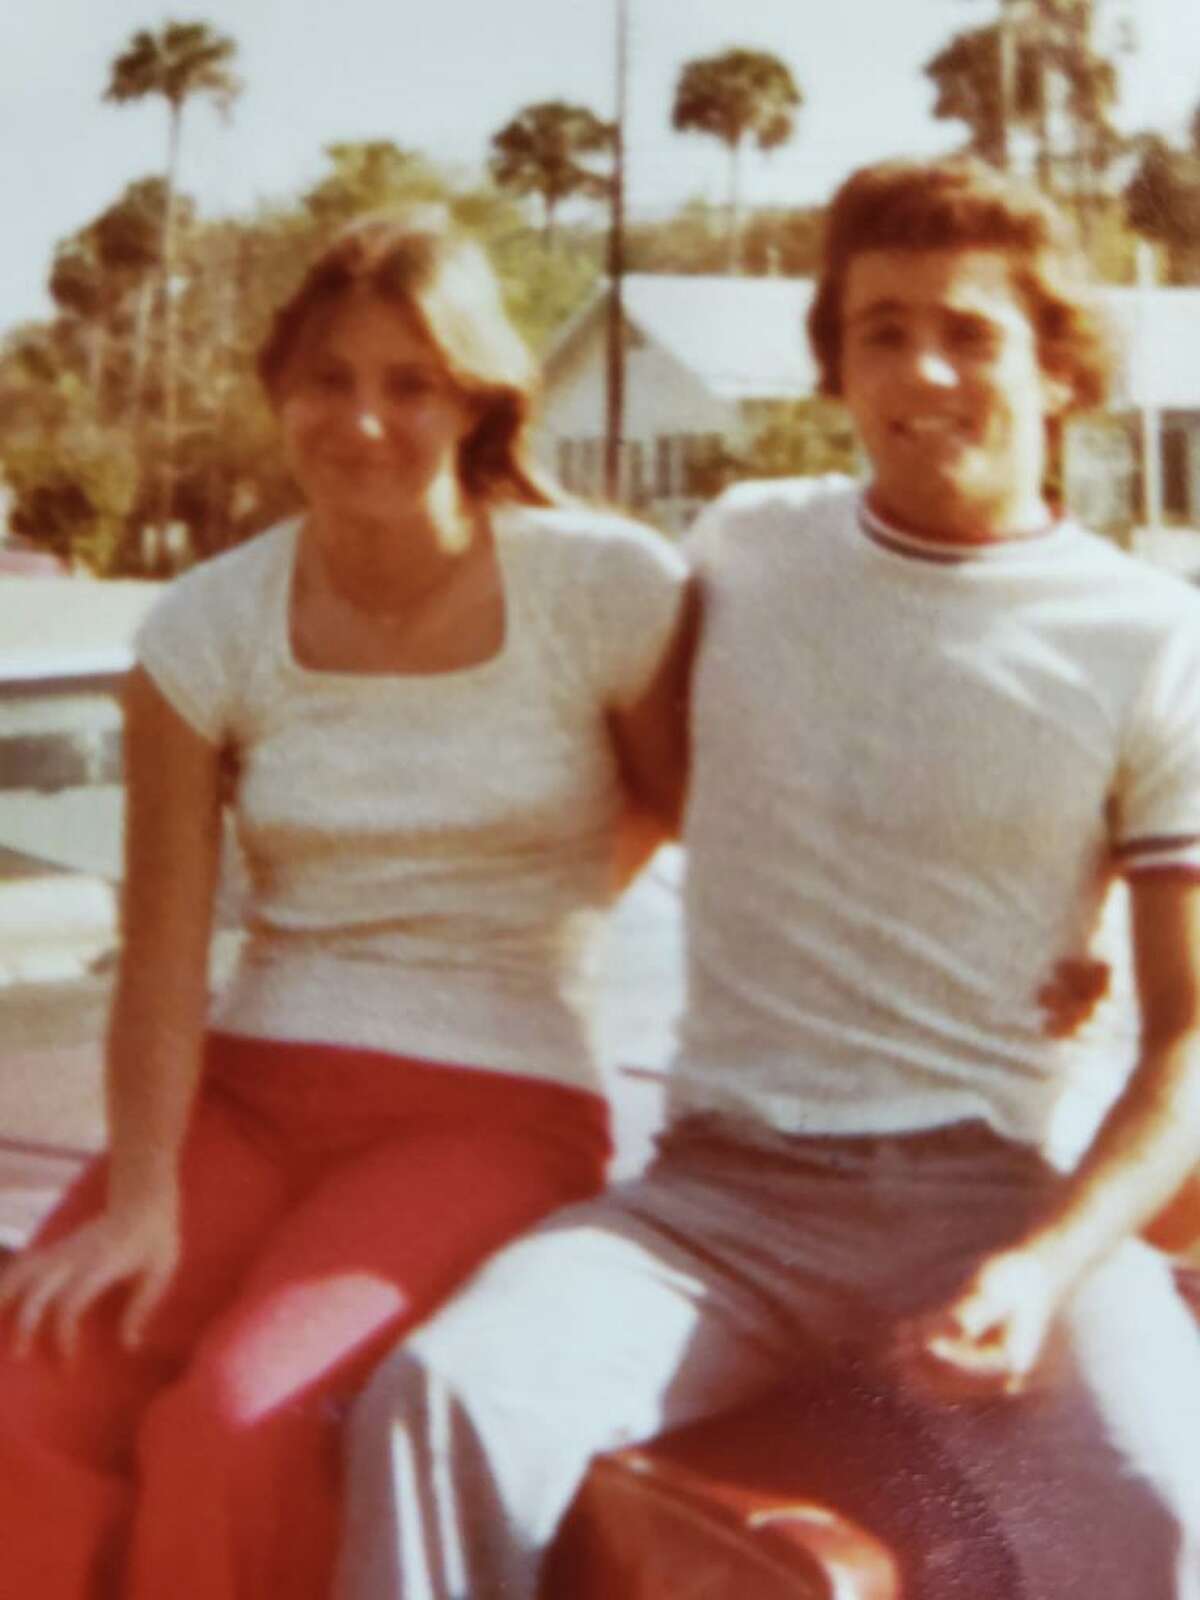 Tina Gail Linn and Harold Dean Clouse. The young couple were murdered in Harris County in late 1980. Their bodies were finally identified, a break in a 40—year-old cold case.